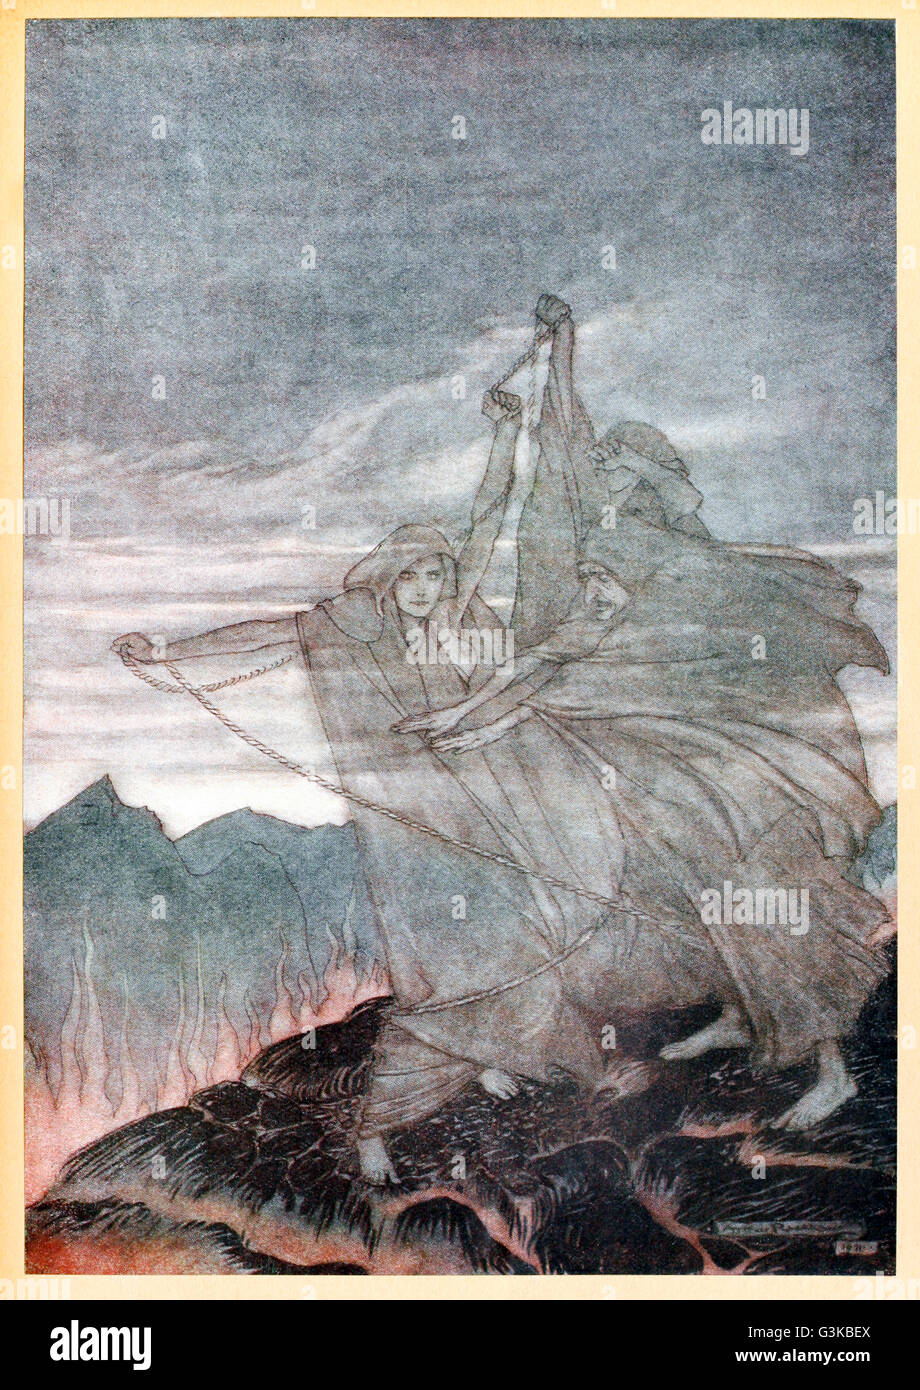 “The Norns vanish” from 'Siegfried & The Twilight of the Gods' illustrated by Arthur Rackham (1867-1939). The three Norns gather beside Brünnhilde's rock, weaving the rope of Destiny, when the rope unexpectedly breaks they disappear. See description for more information. Stock Photo